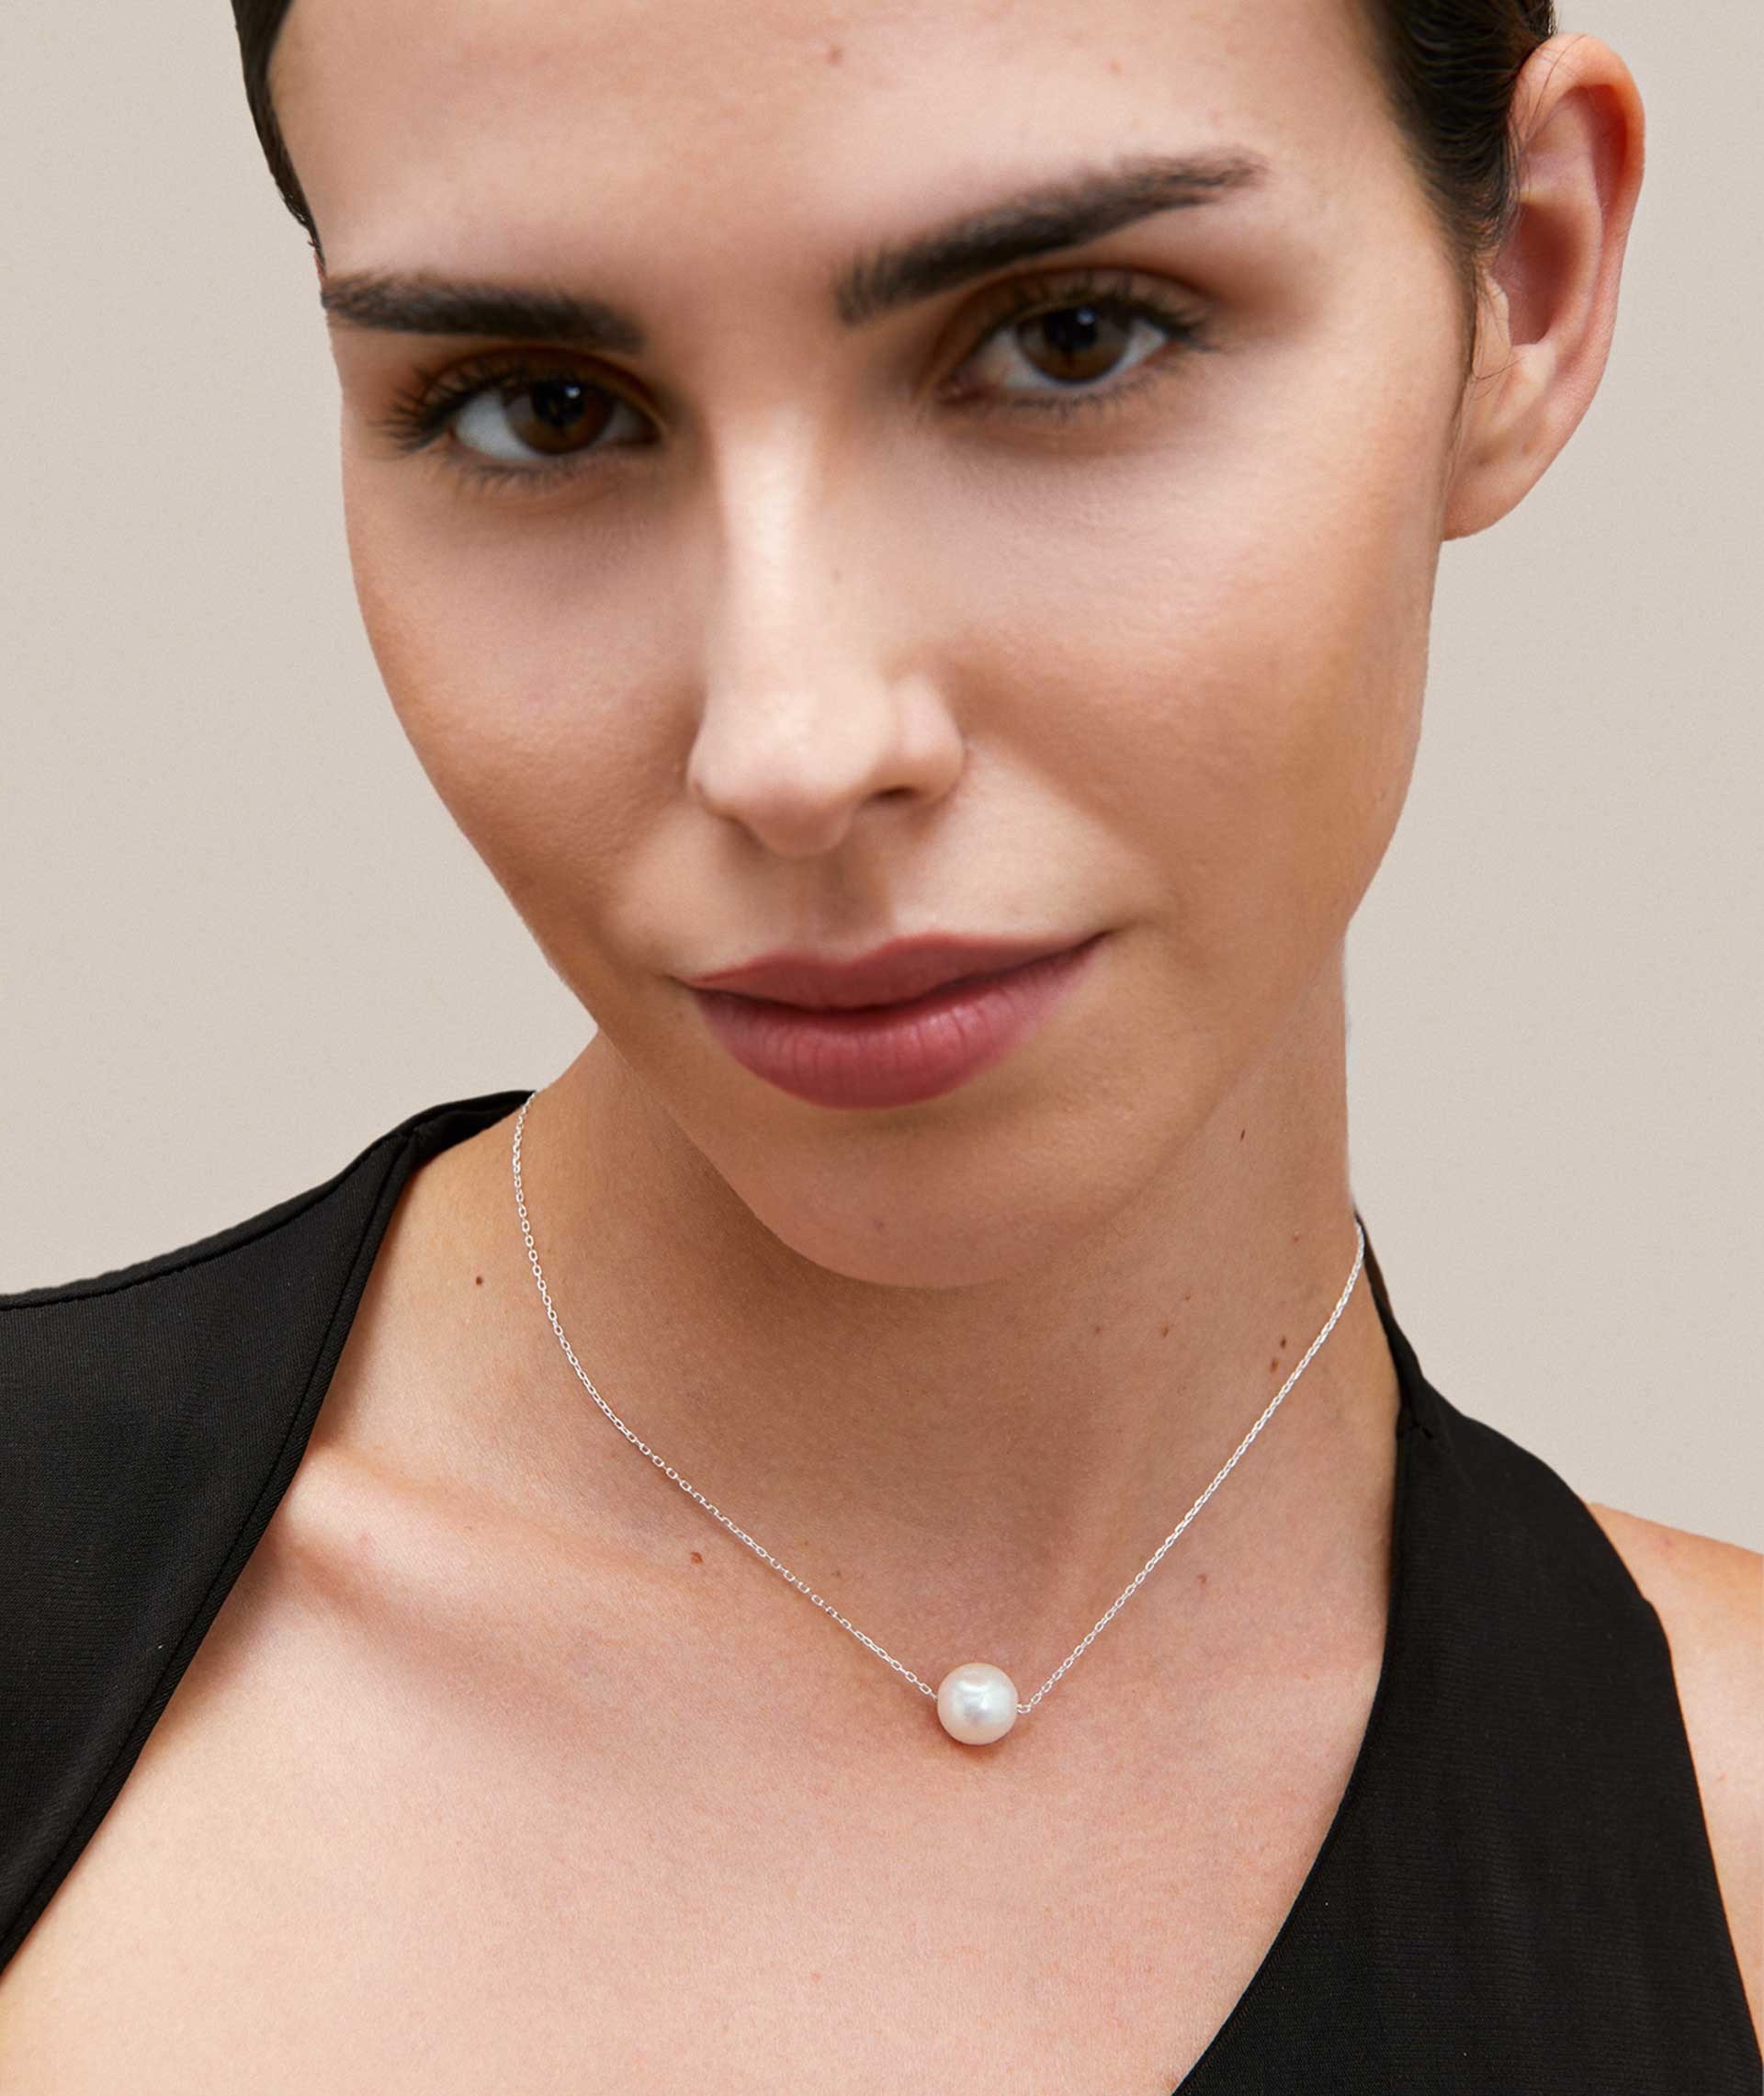 Duna Pendant 925 Sterling Silver with 12mm Cultivated pearl.